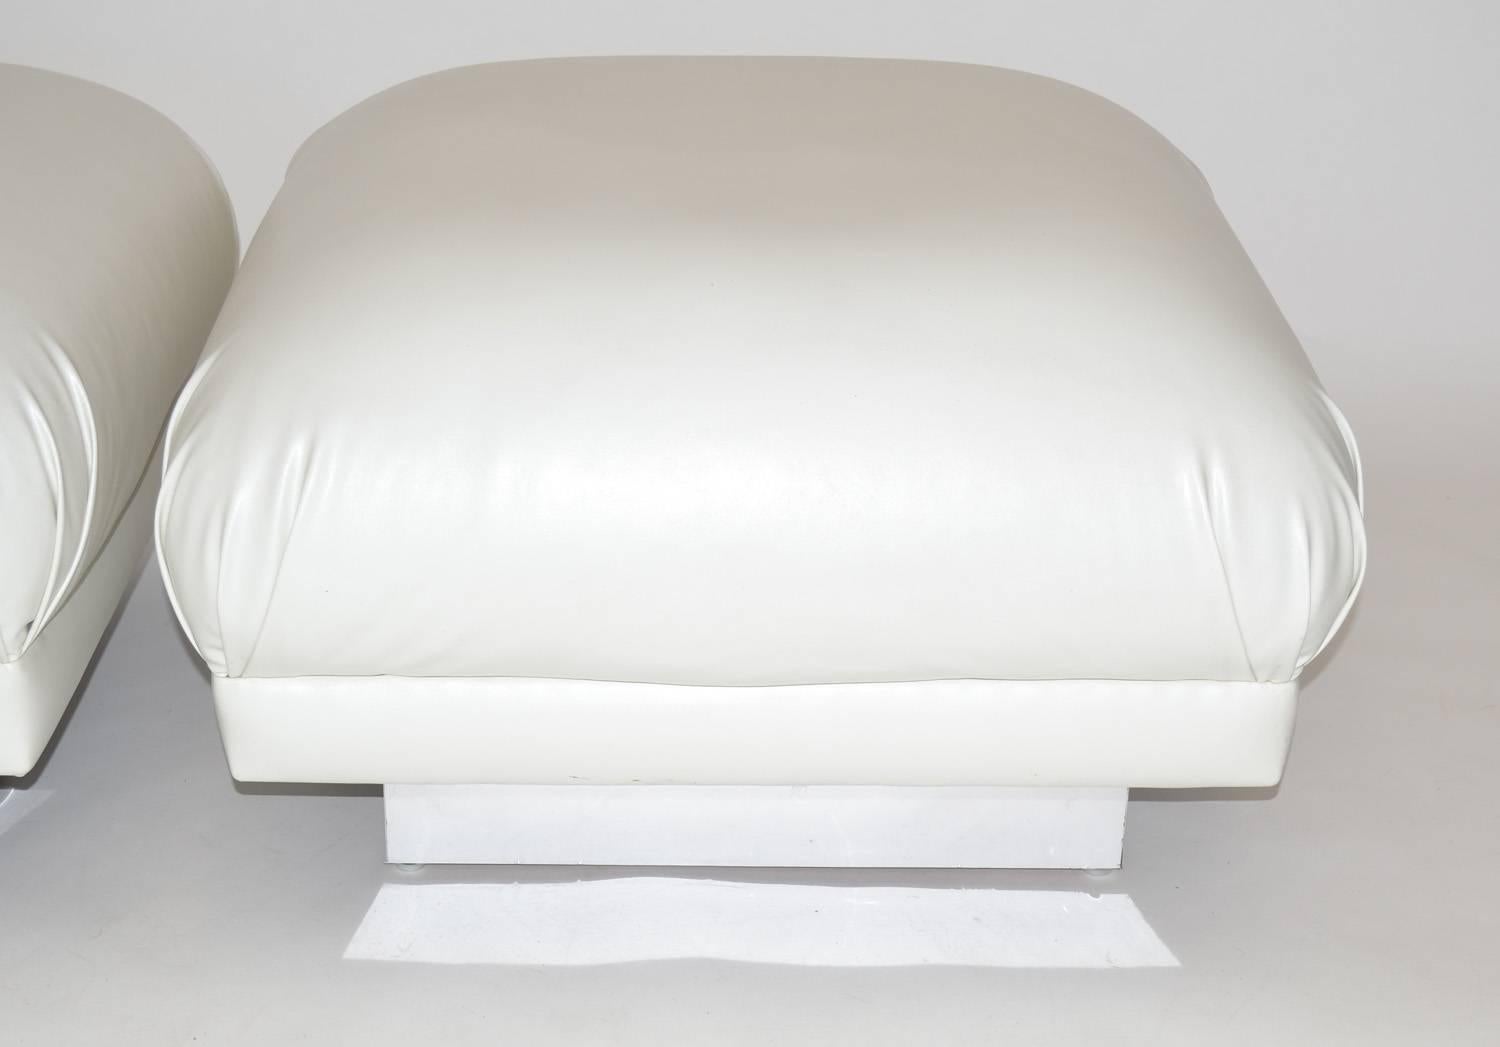 Pair of oversized ottomans or poufs in the soufflé style. Features large square cushions with pleated corners over a chrome banded wood base. Upholstered in white leatherette vinyl, 1970s.